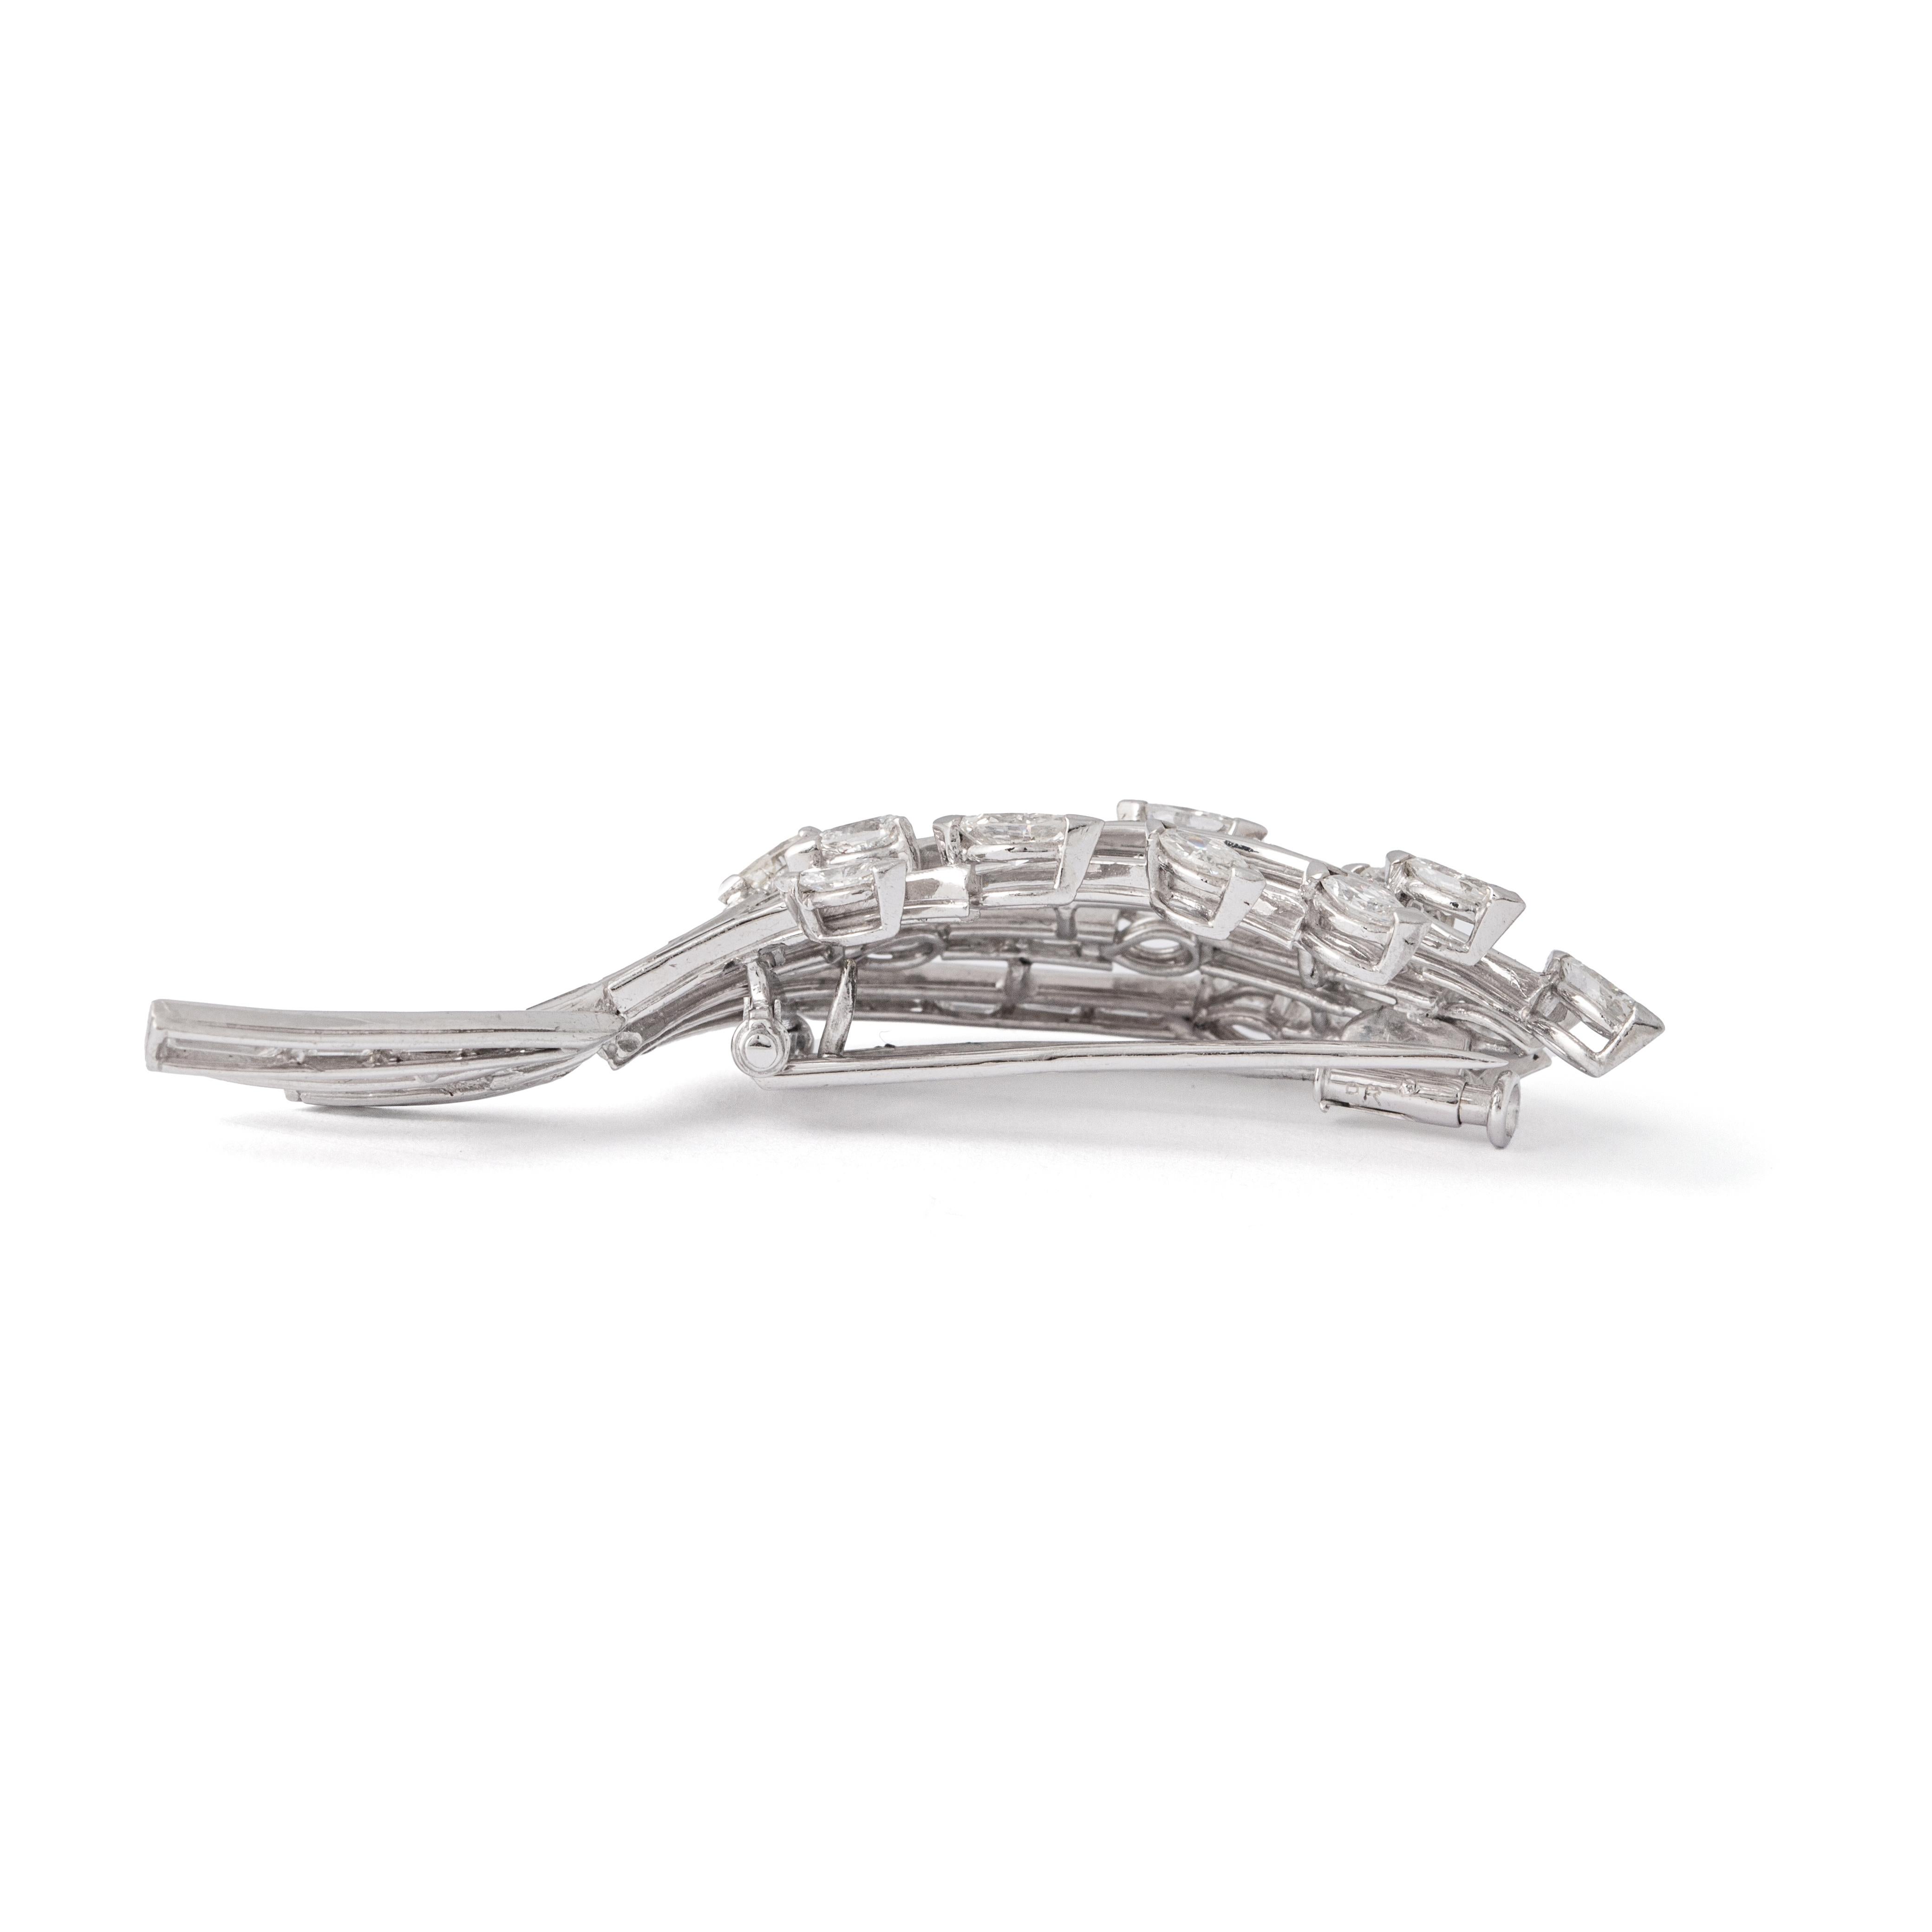 Diamond and Platinum Brooch.

Elevate your style with this captivating Diamond and Platinum Brooch, adorned with a mesmerizing combination of diamonds. Featuring a brilliant 2.25-carat pear-shaped and marquise-cut diamonds, alongside 3.85 carats of